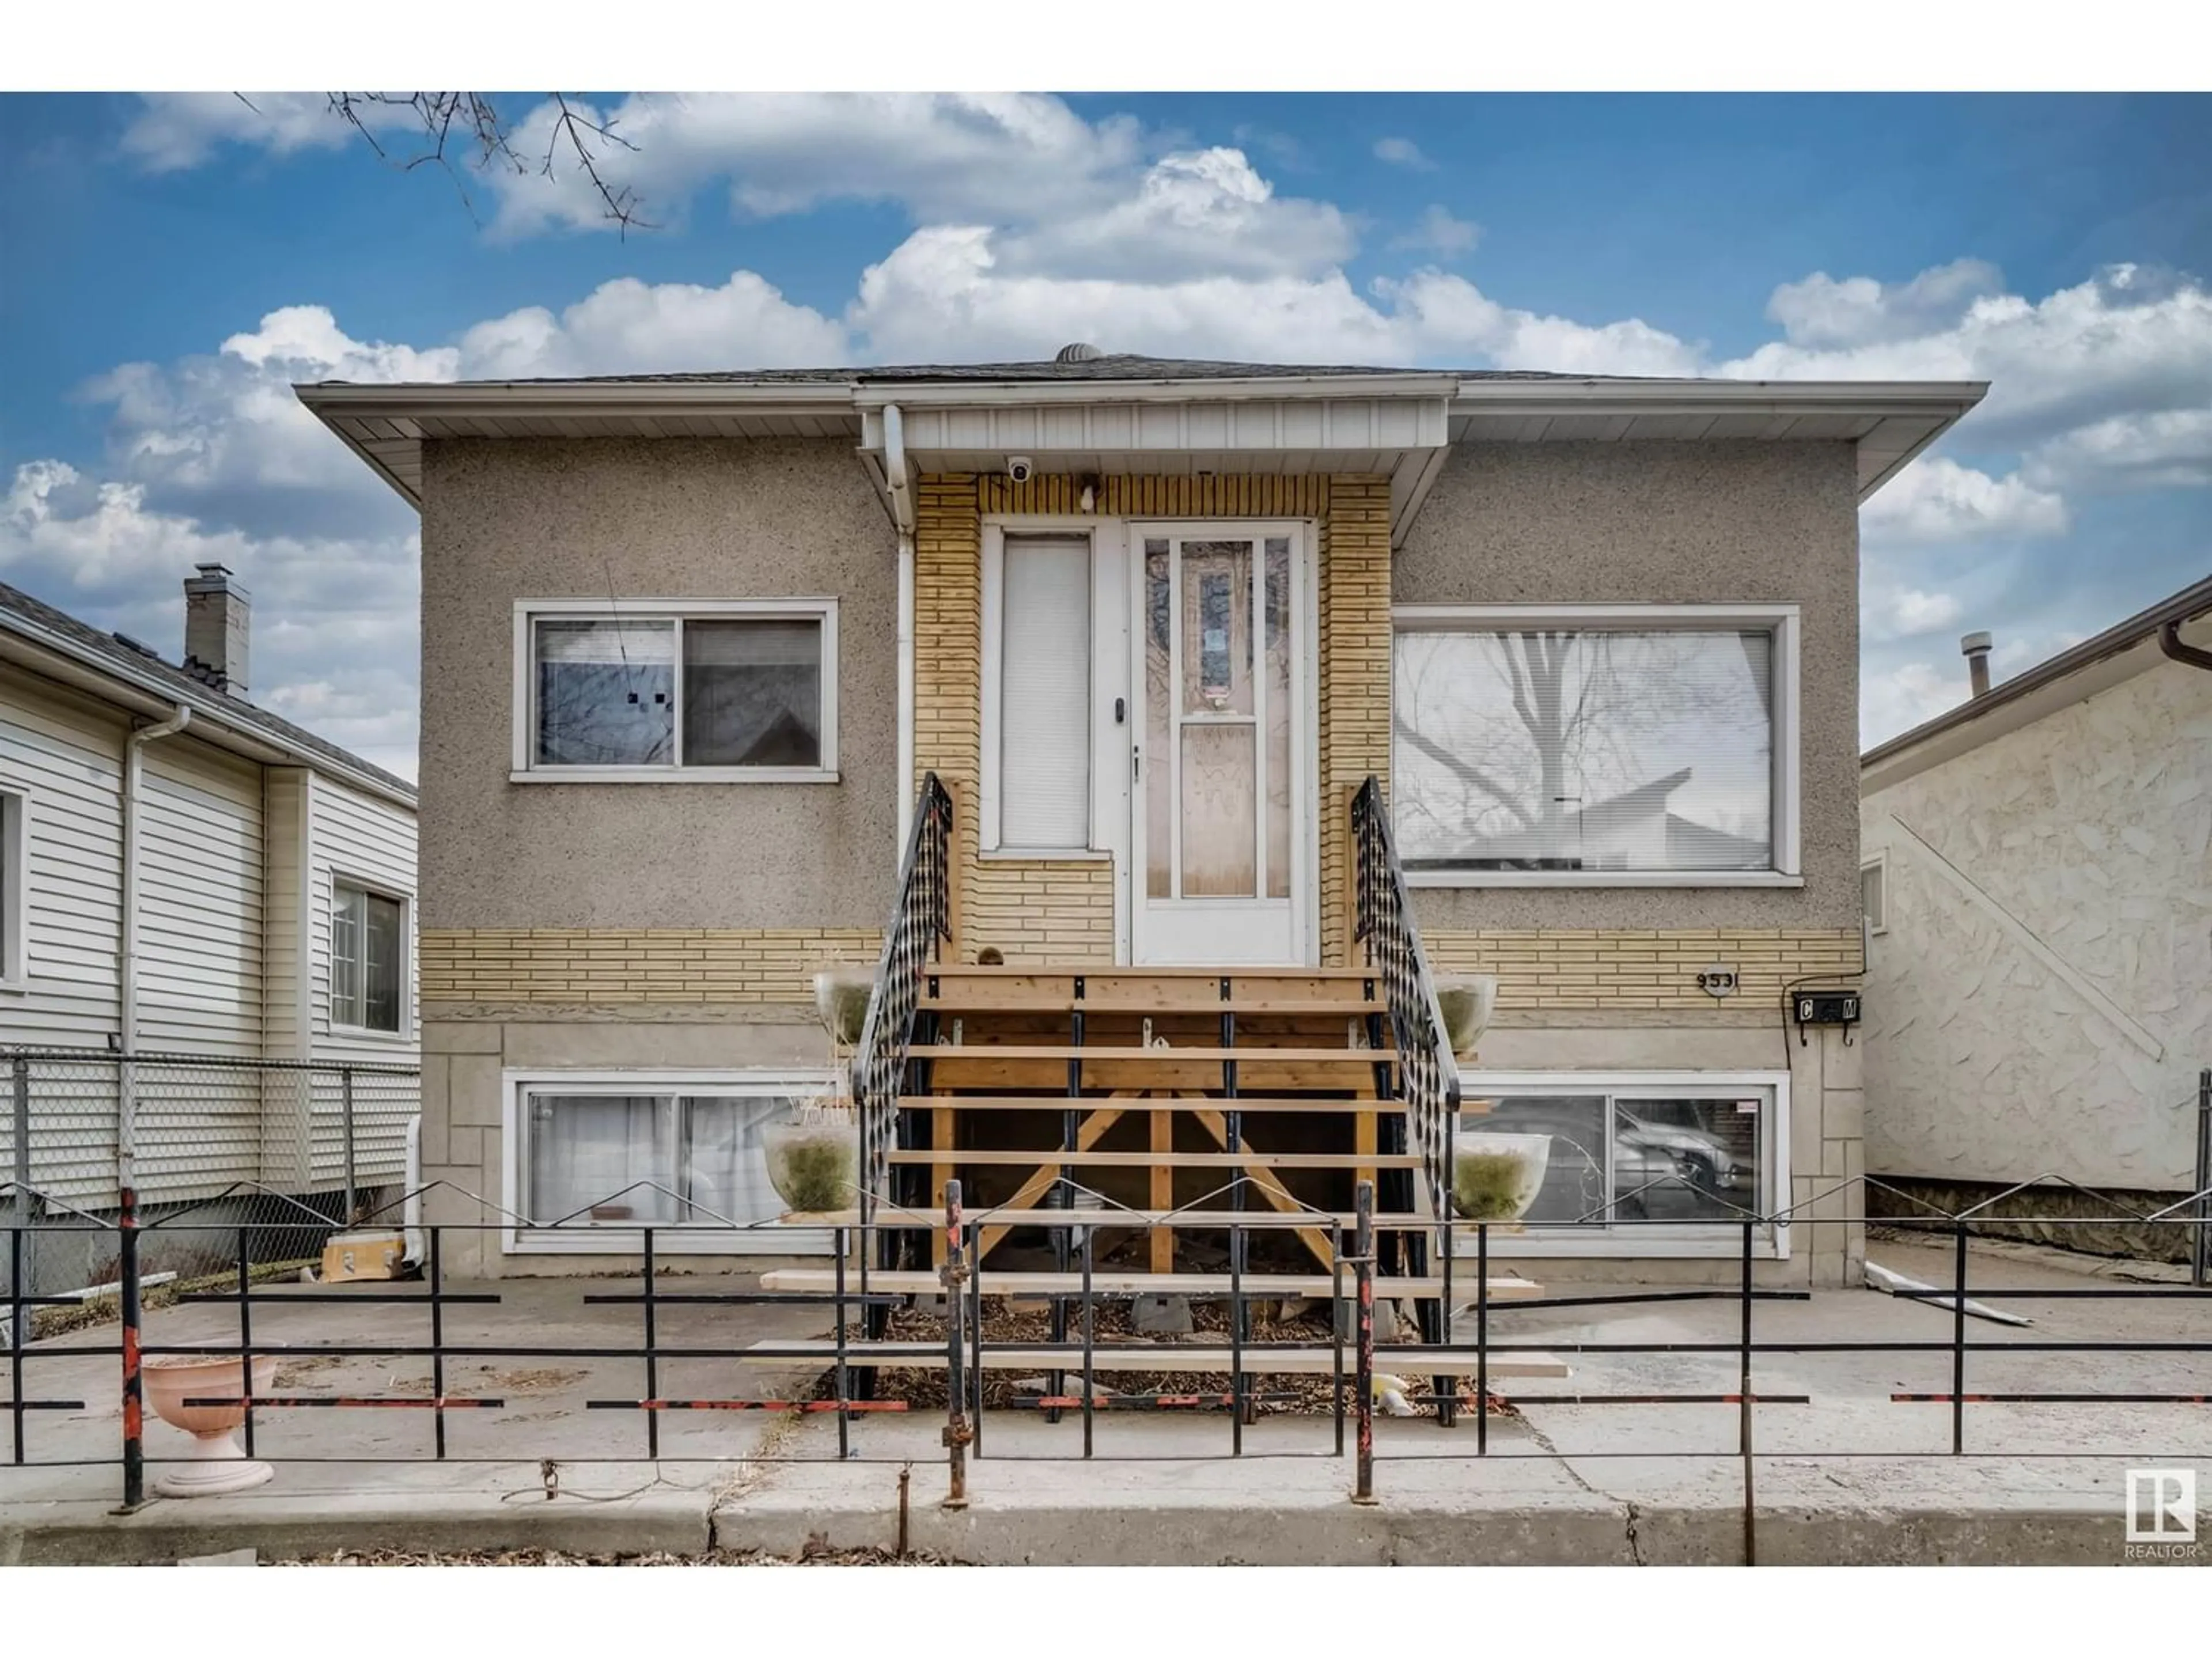 A pic from exterior of the house or condo for 9531 109A AV NW, Edmonton Alberta T5H1G2